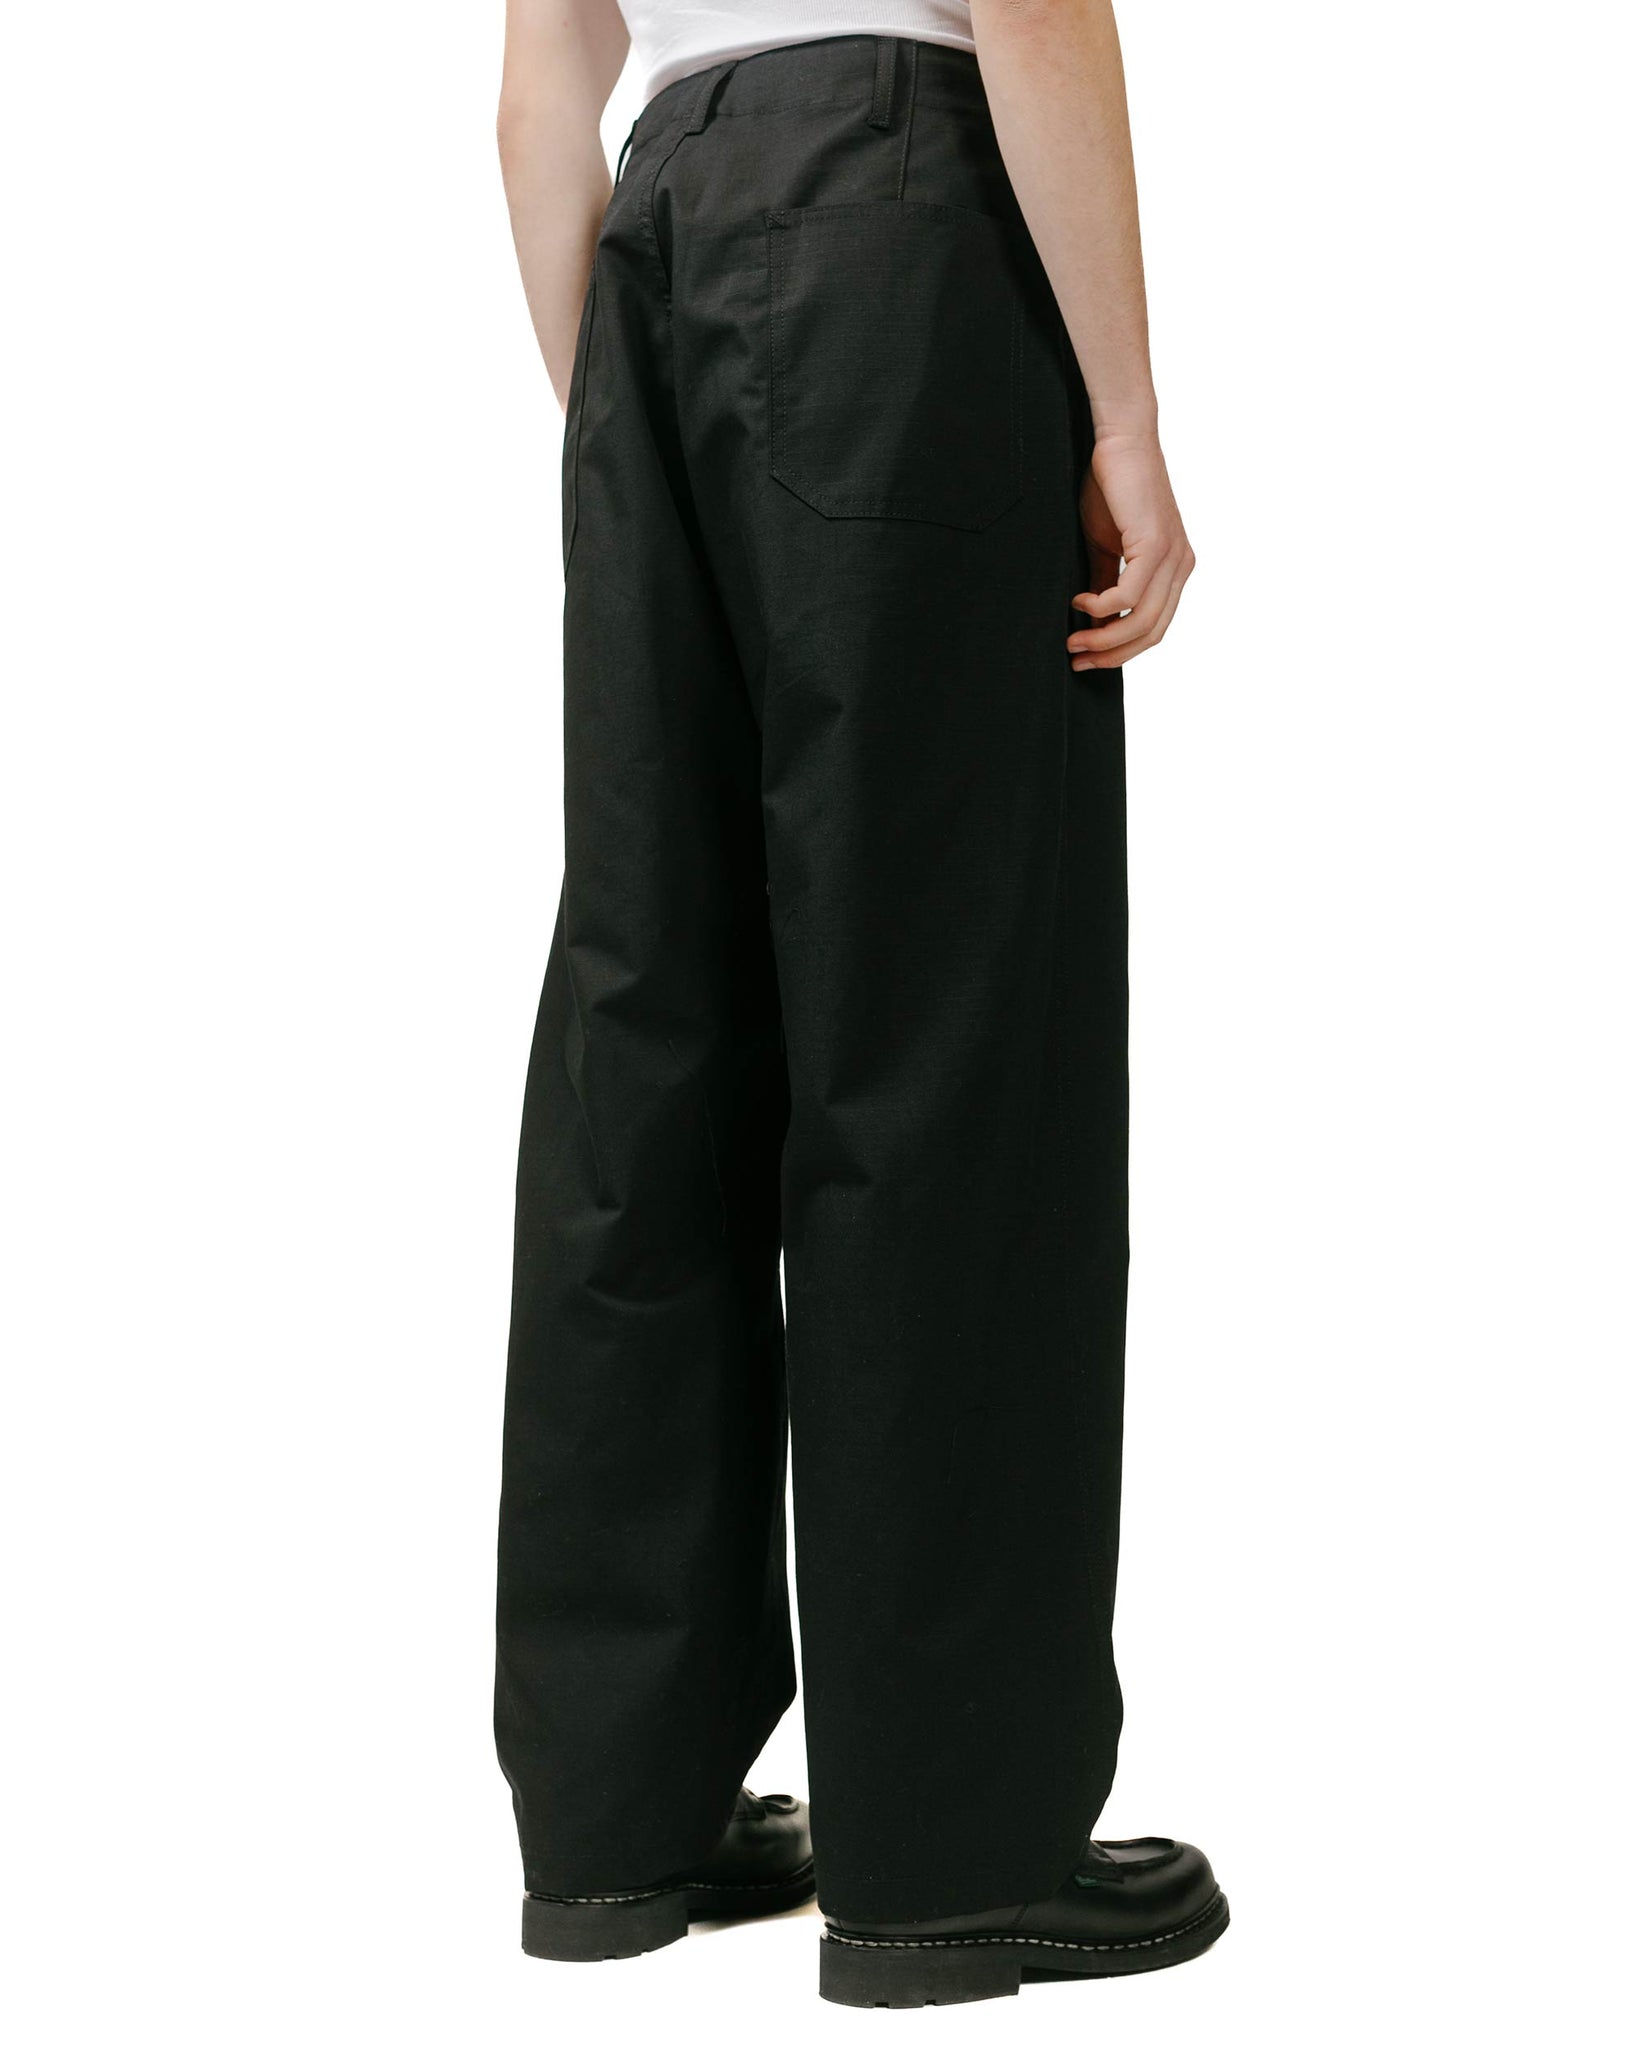 Engineered Garments Workaday Utility Pant Black Cotton Ripstop model back